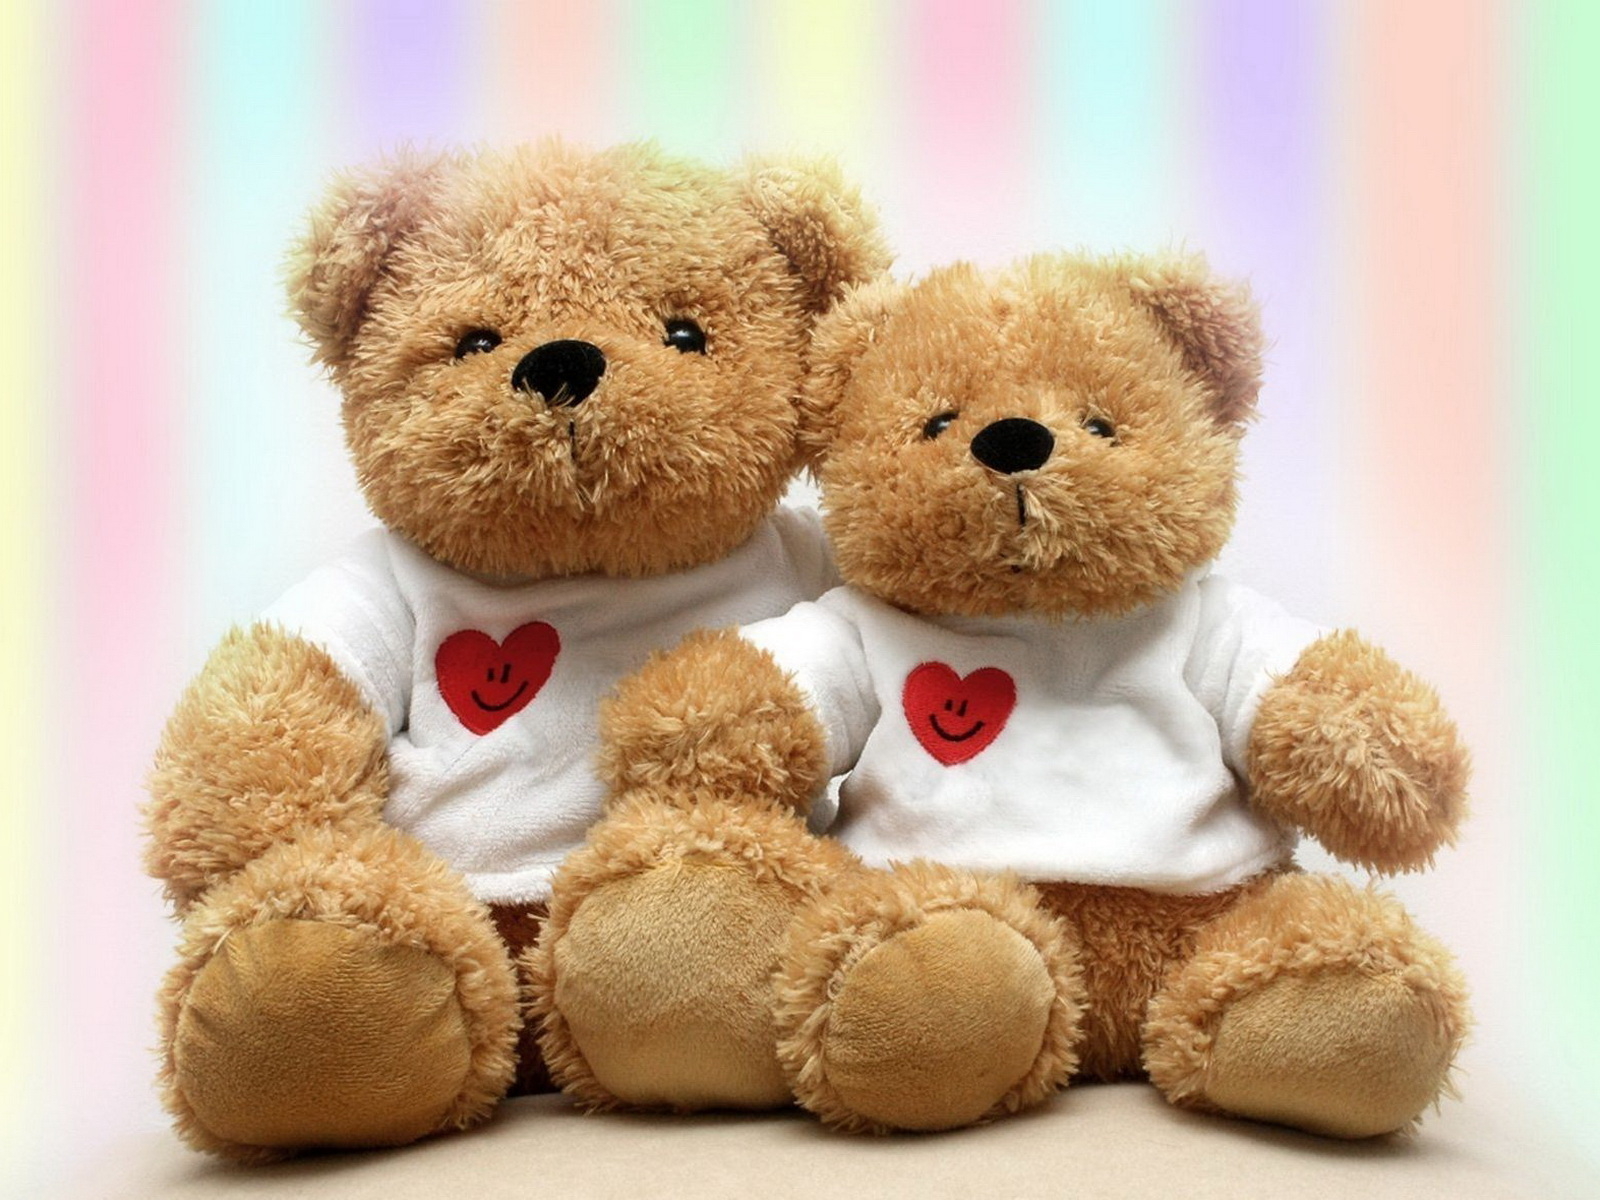 Teddy Bear Lonely Windows Theme And Wallpaper All For